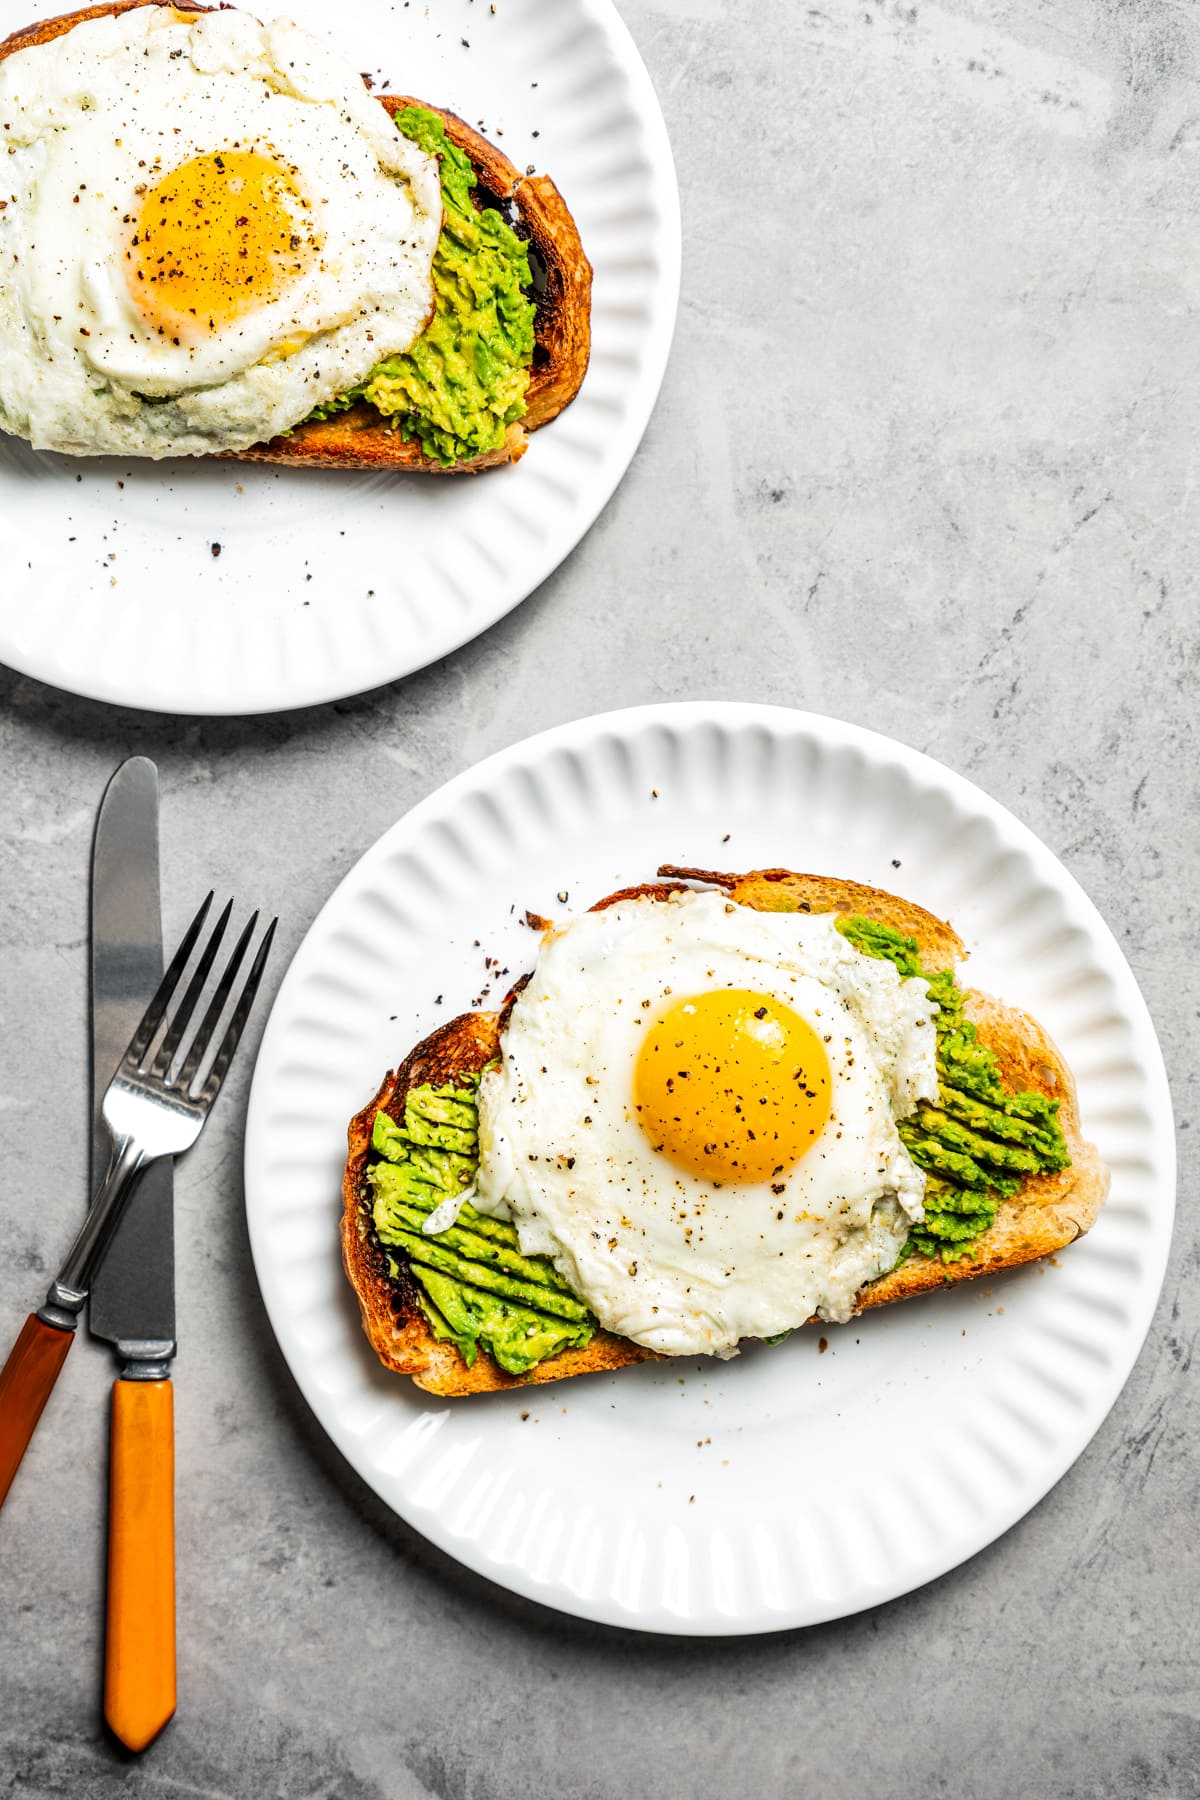 Two white plates holding Avocado toasts topped with a sunny side-up egg.